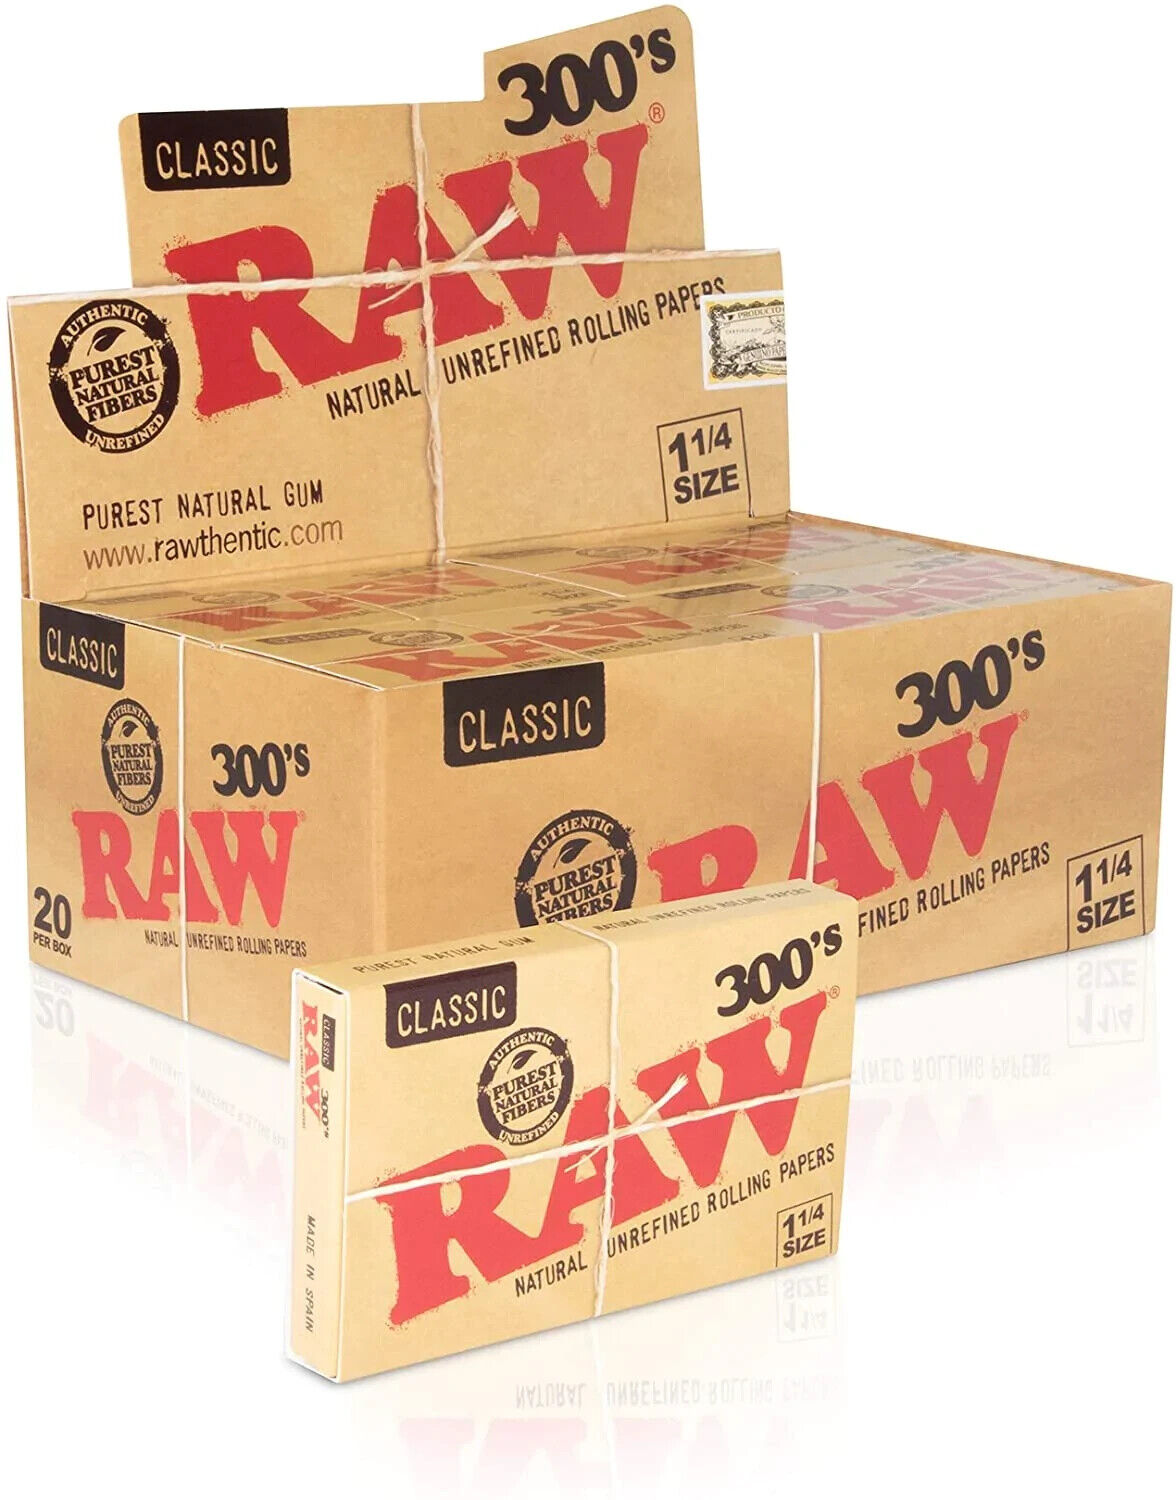 😎RAW CLASSIC NATURAL UNREFINED ROLLING PAPERS FULL BOX 1 1/4 -✨300\'s💛20 PACKS